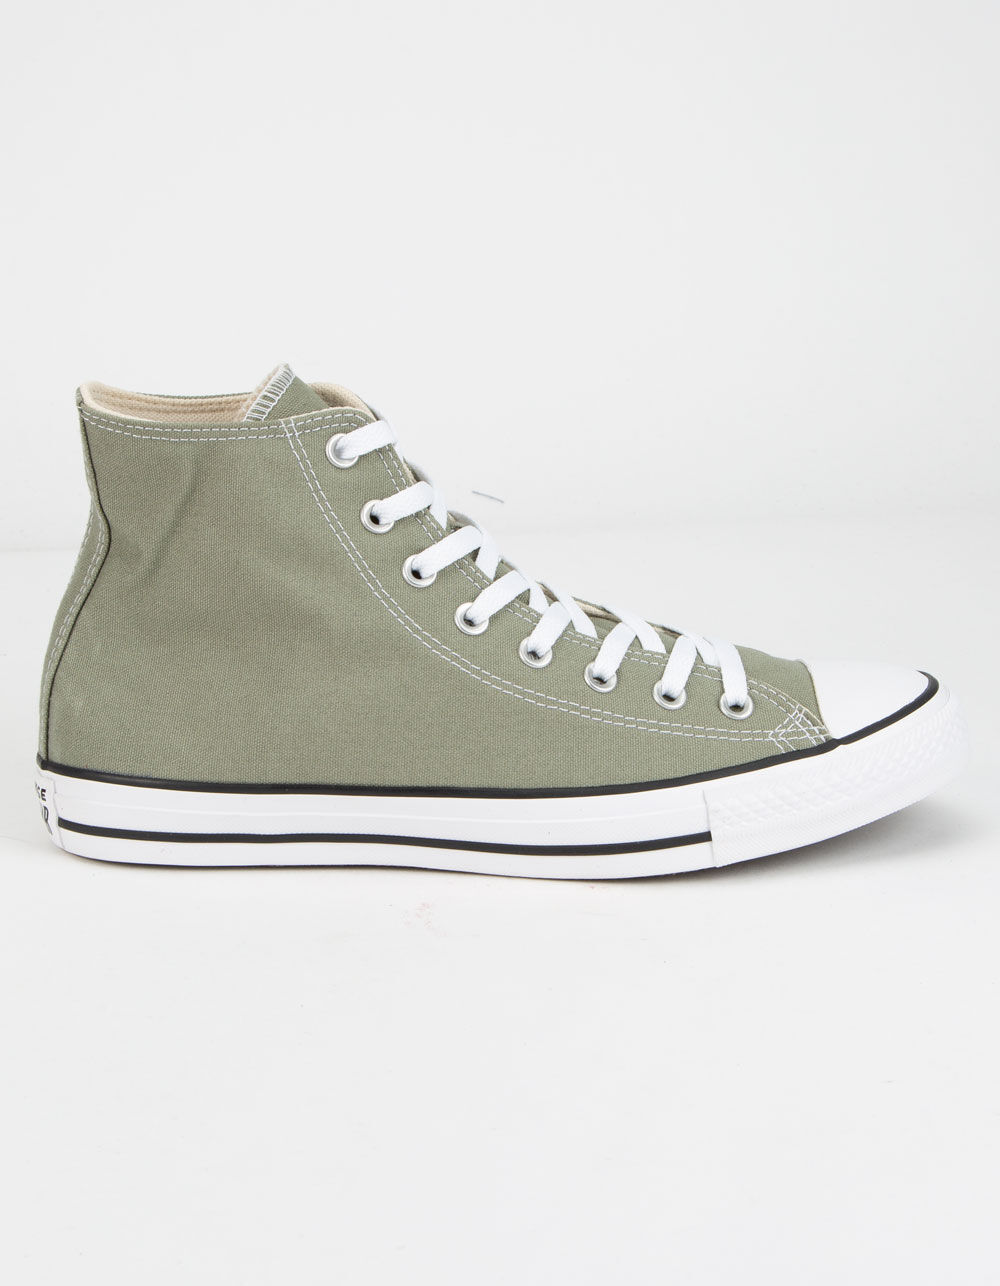 CONVERSE Chuck Taylor All Star Jade Stone High Top Shoes - JADE STONE ...